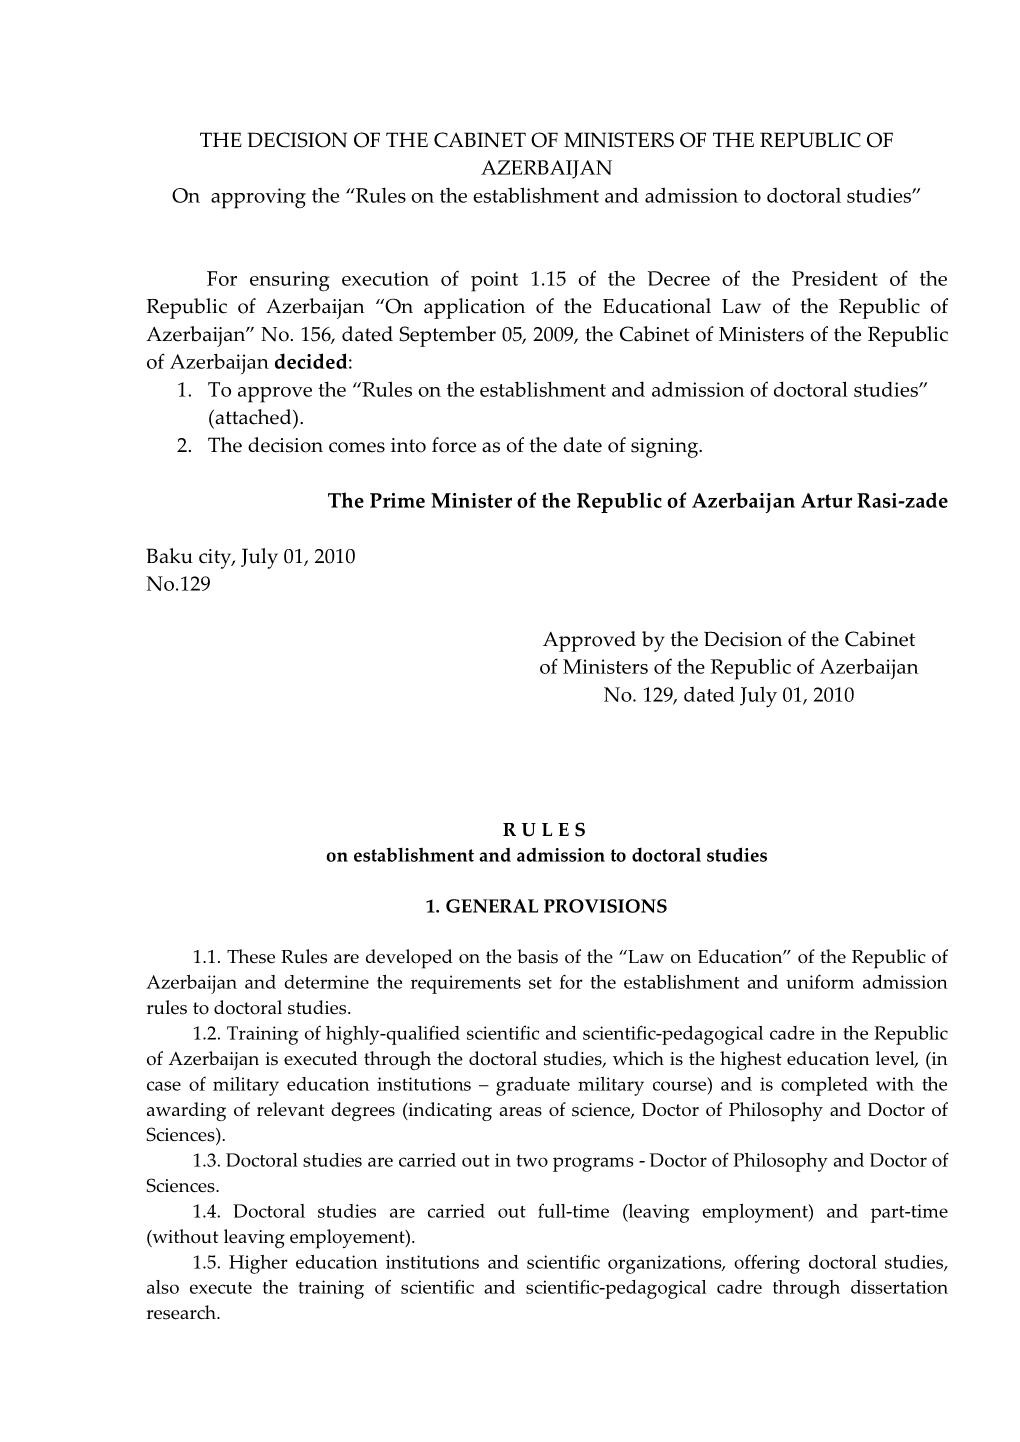 THE DECISION of the CABINET of MINISTERS of the REPUBLIC of AZERBAIJAN on Approving the “Rules on the Establishment and Admission to Doctoral Studies”